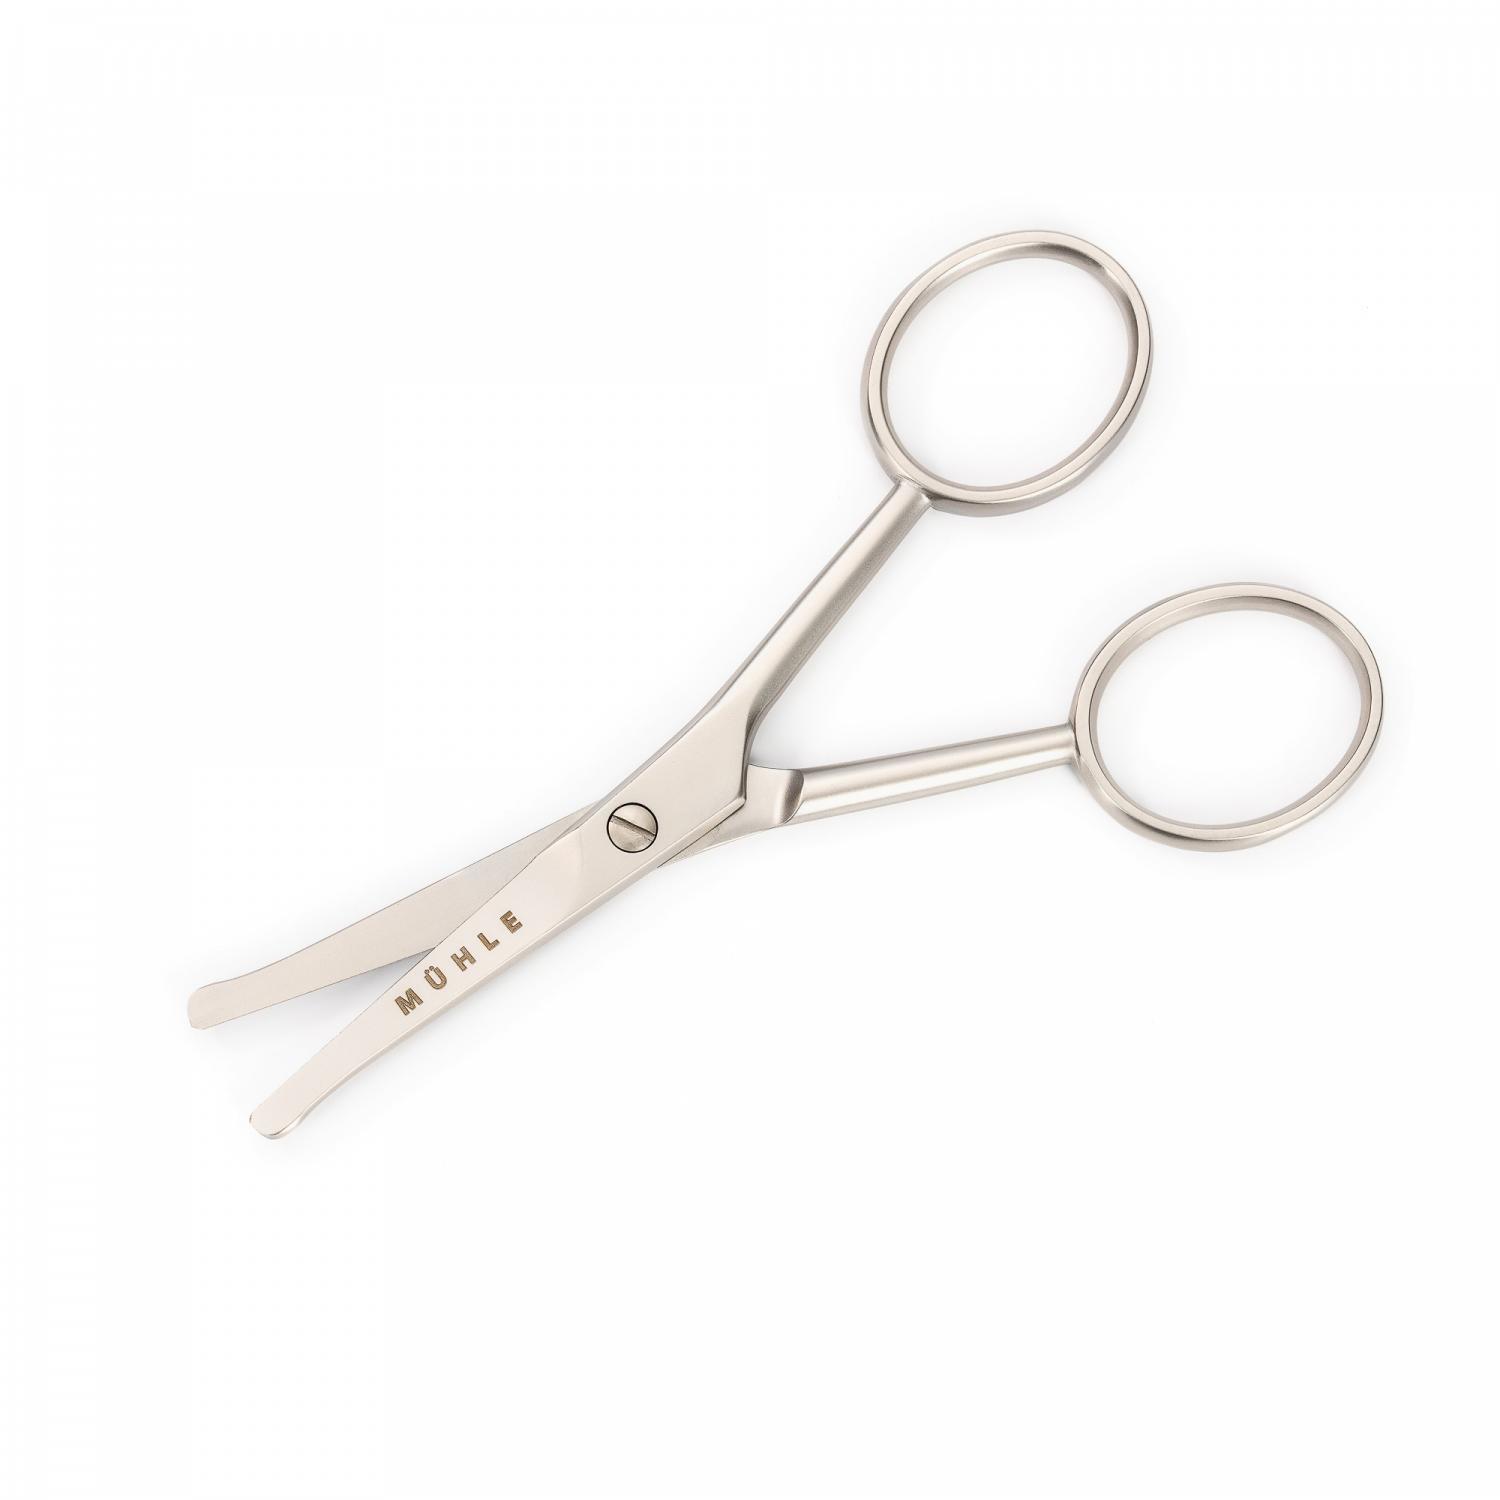 beard nose and ear hair scissors from MUHLE